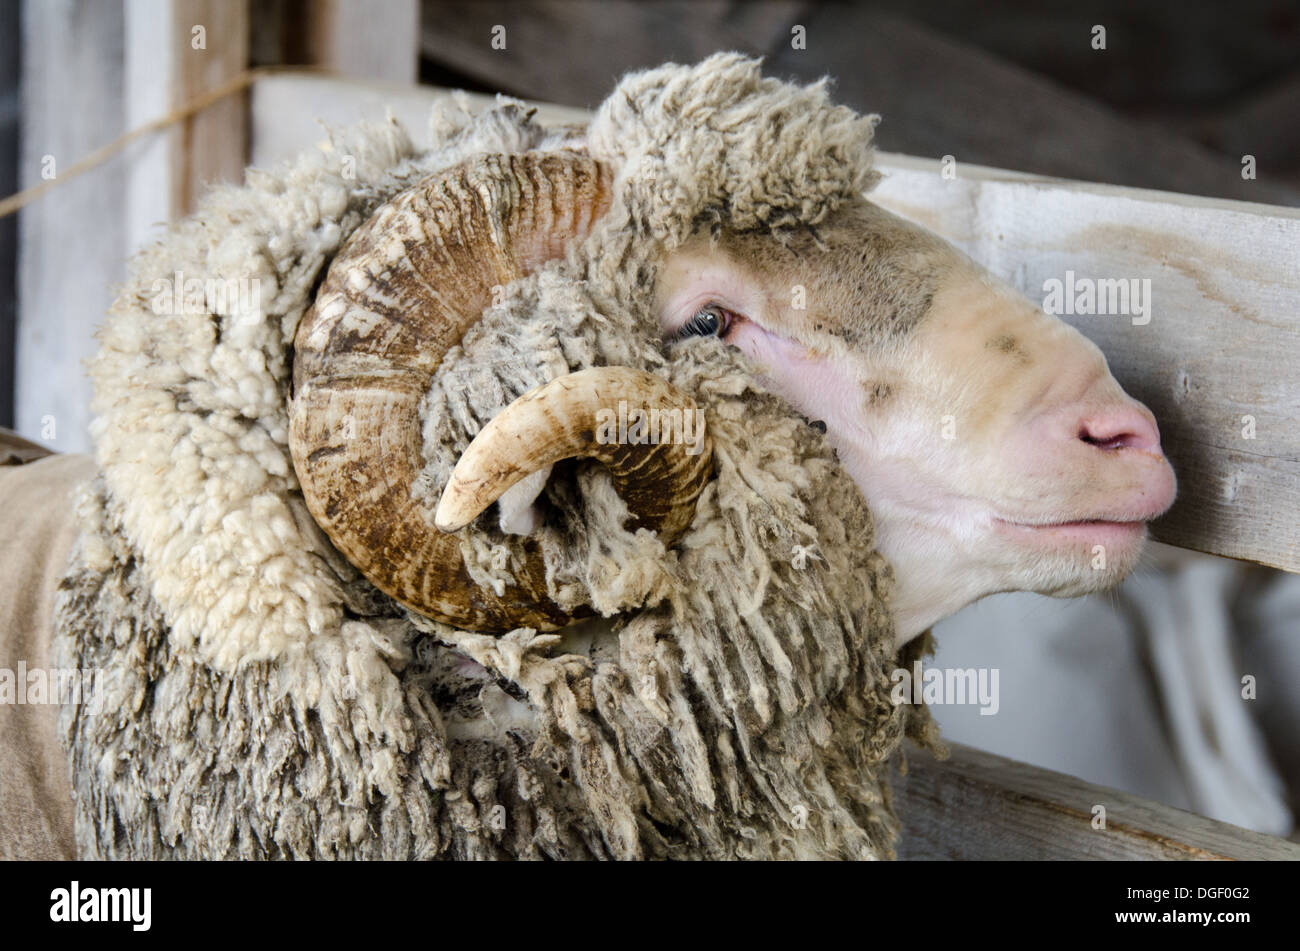 Shaggy Merino sheep with spiral horns at the Common Ground Fair, Maine. Stock Photo